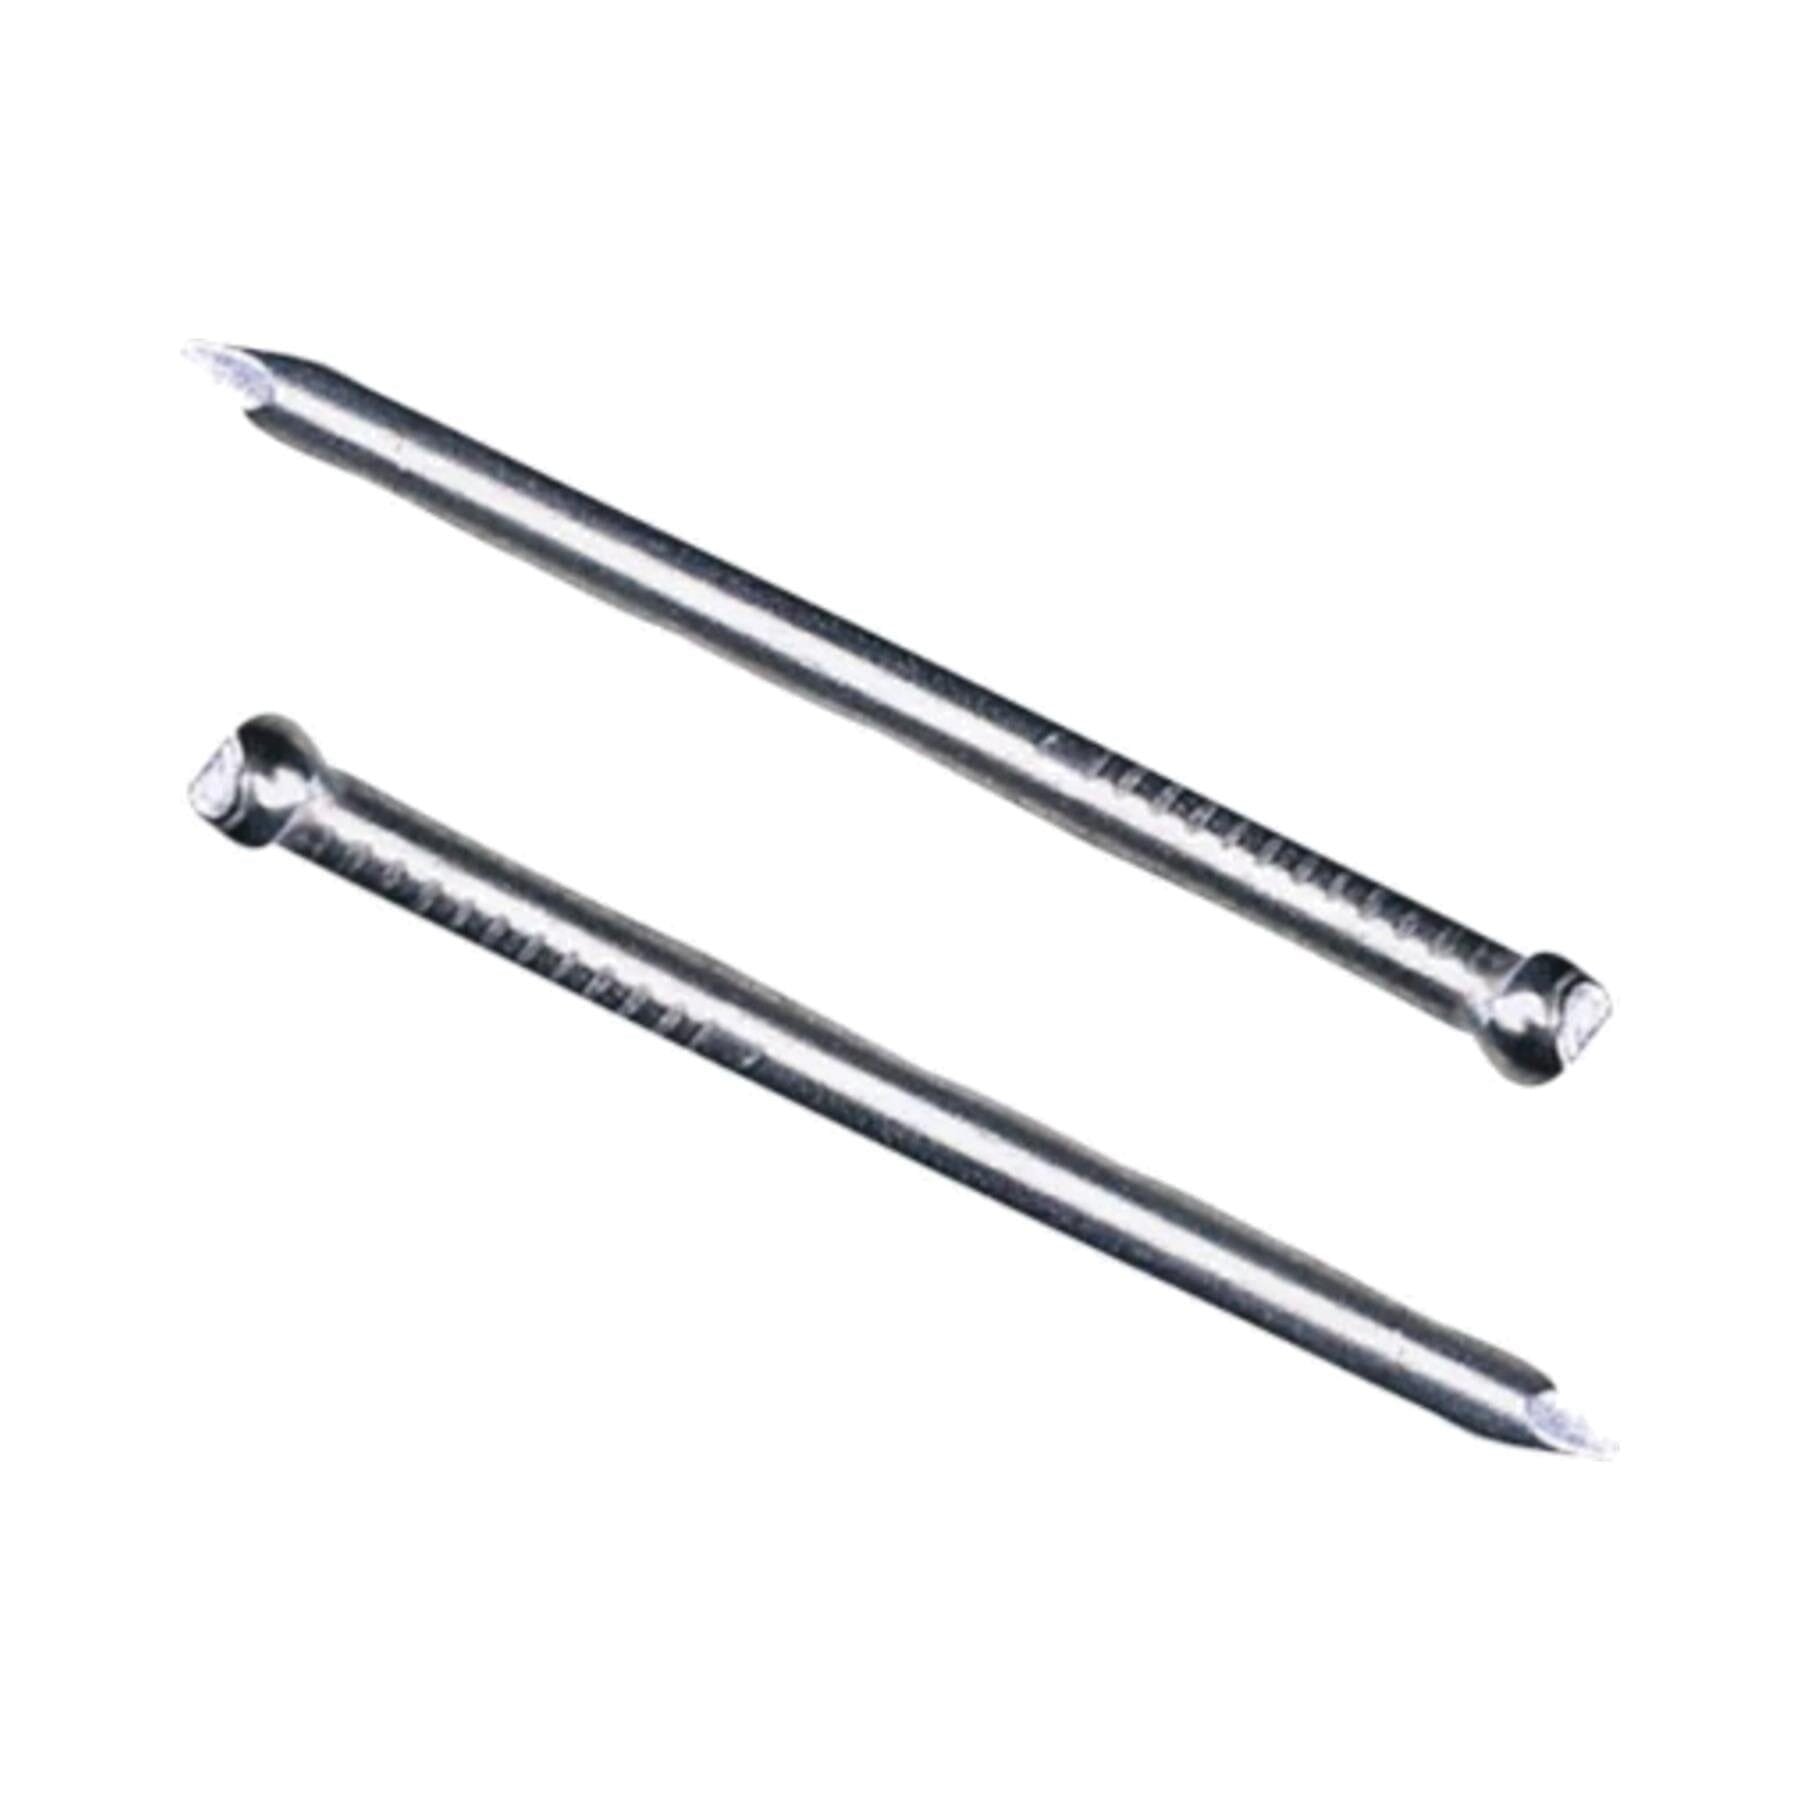 Home Hardware 40mm Lost Head Nails 250g Round Nails | Snape & Sons